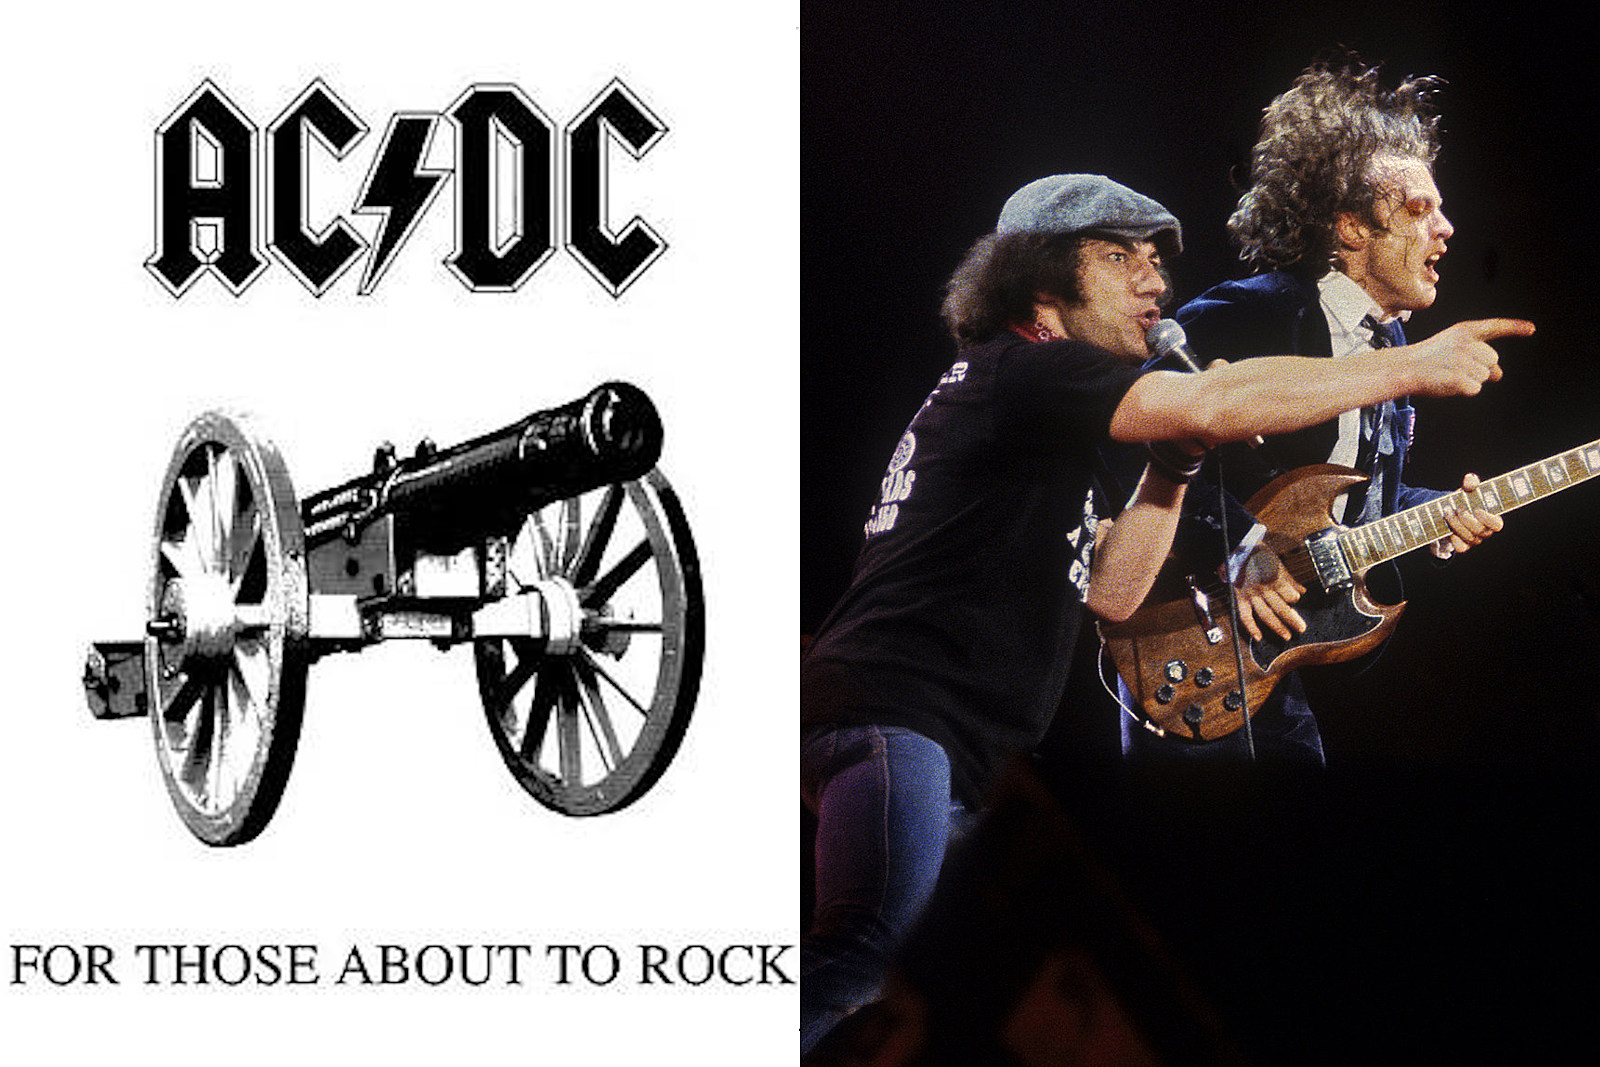 Meaning of Live Wire by AC/DC